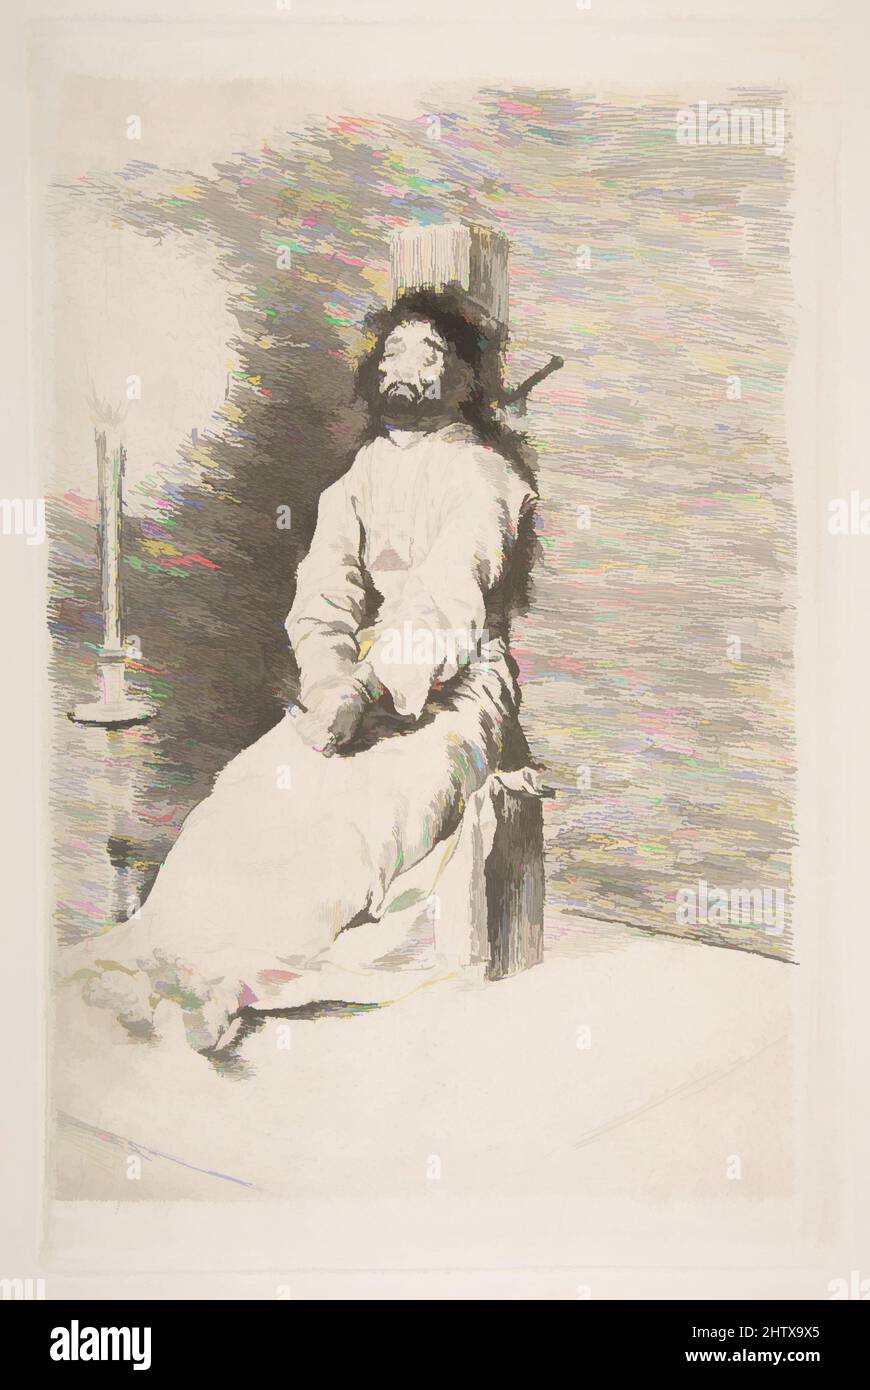 Art inspired by The garroted man (El agarrotado), 1778–80, Etching and burin, Plate: 12 15/16 × 8 3/8 in. (32.8 × 21.3 cm), Prints, Goya (Francisco de Goya y Lucientes) (Spanish, Fuendetodos 1746–1828 Bordeaux, Classic works modernized by Artotop with a splash of modernity. Shapes, color and value, eye-catching visual impact on art. Emotions through freedom of artworks in a contemporary way. A timeless message pursuing a wildly creative new direction. Artists turning to the digital medium and creating the Artotop NFT Stock Photo